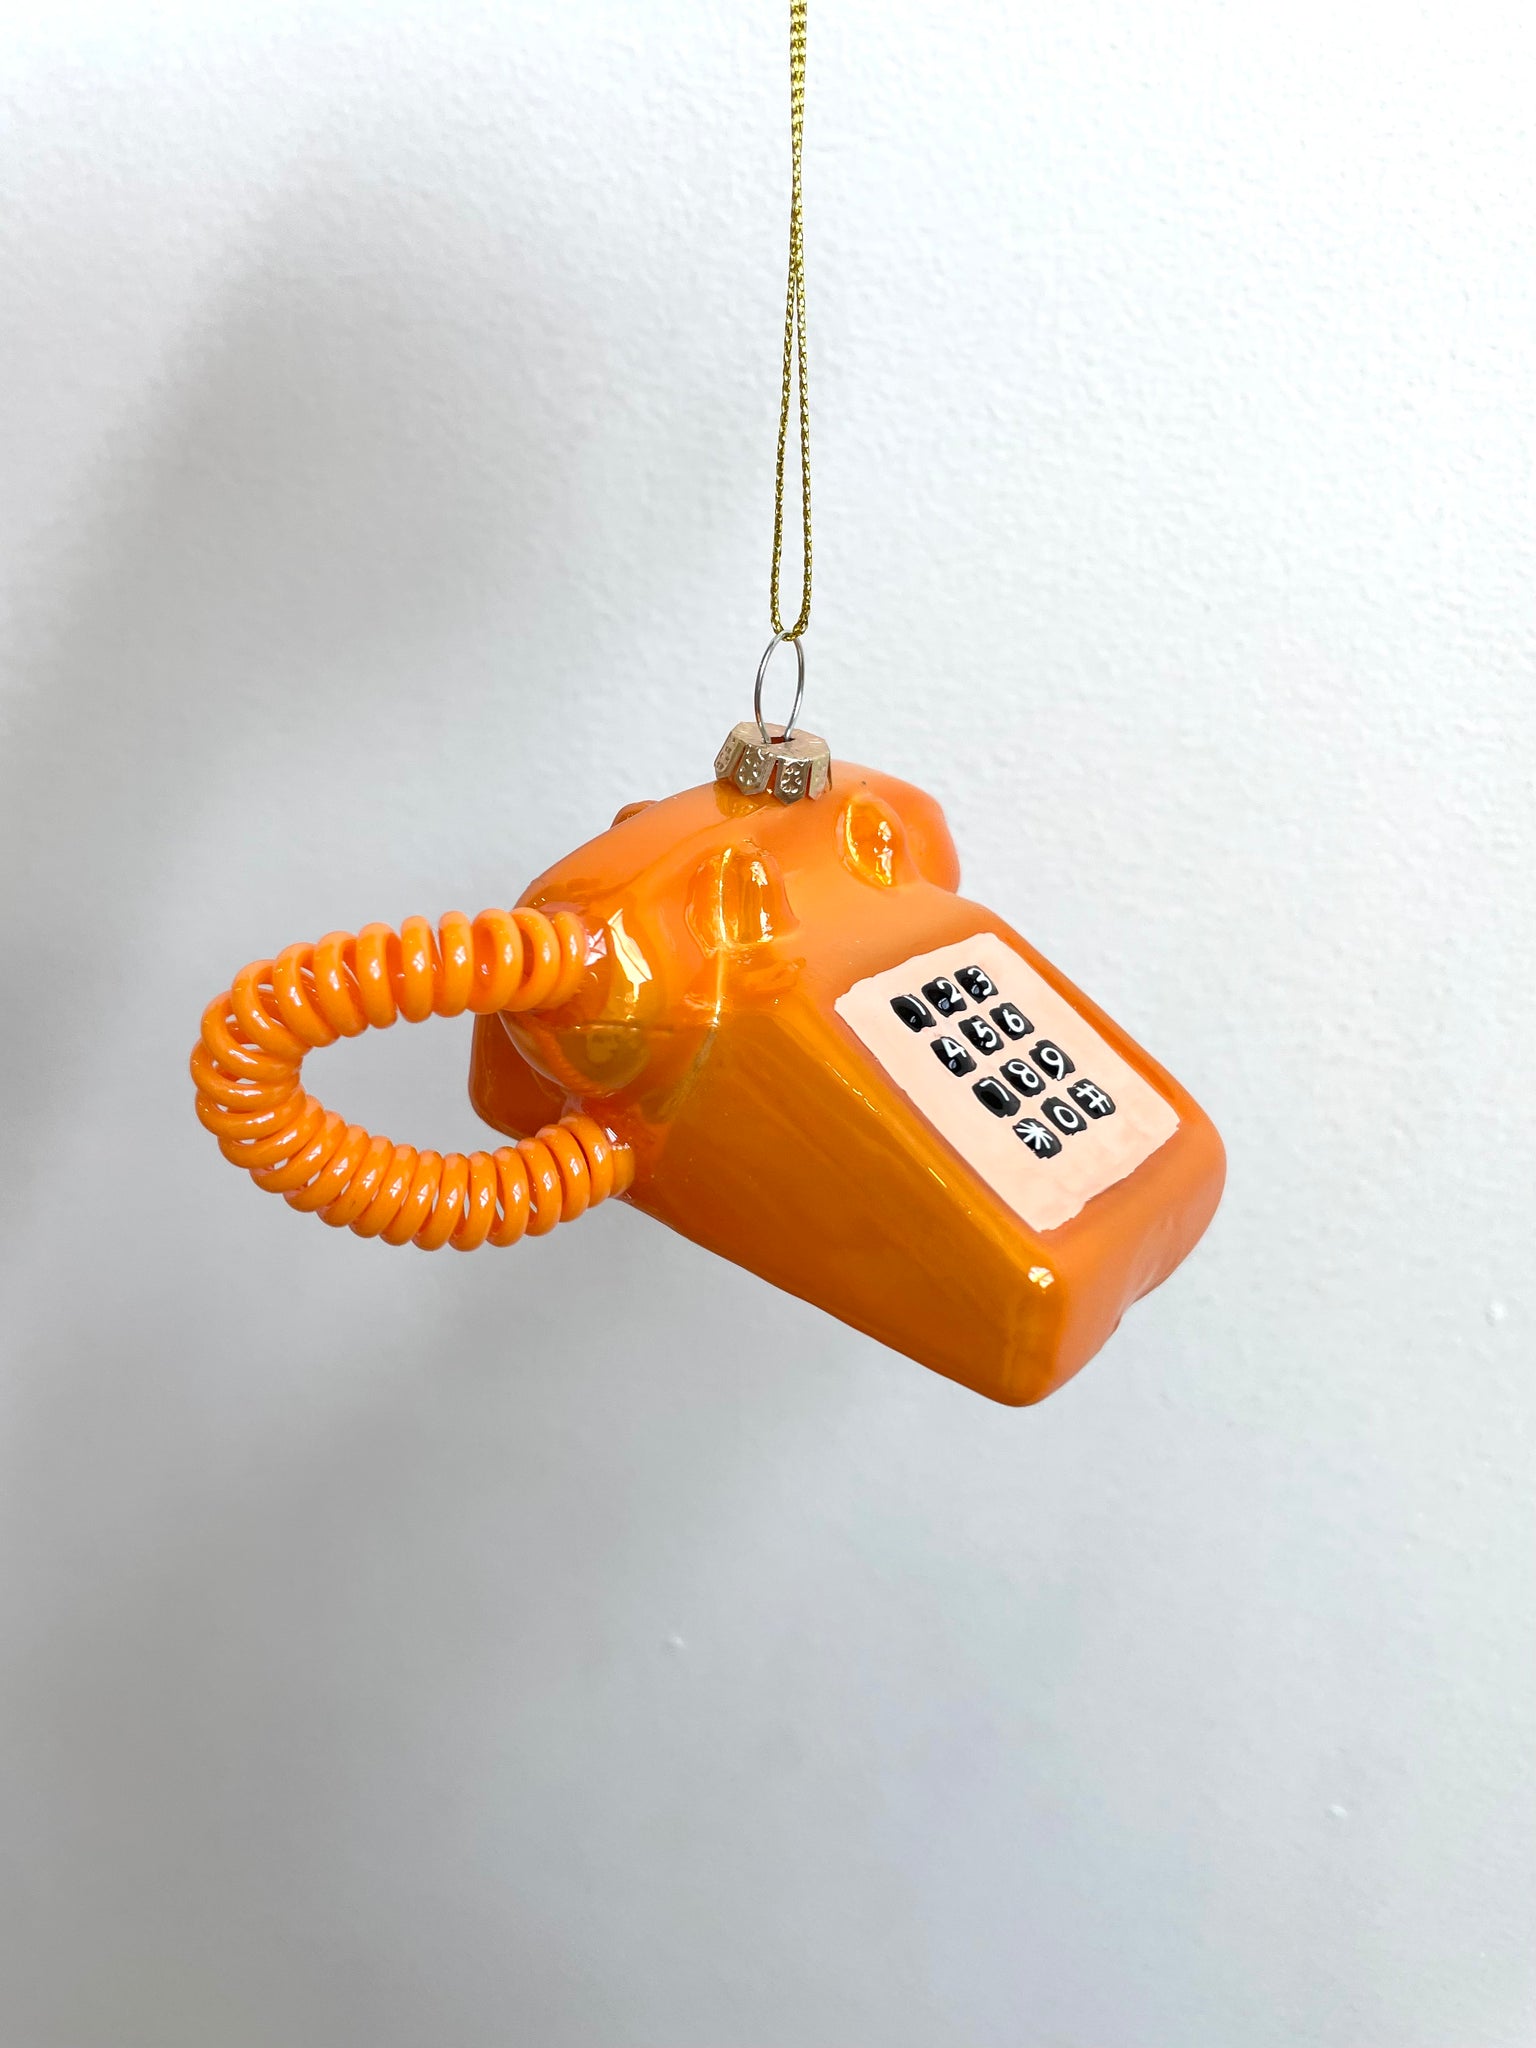 TOUCH TONE TELEPHONE